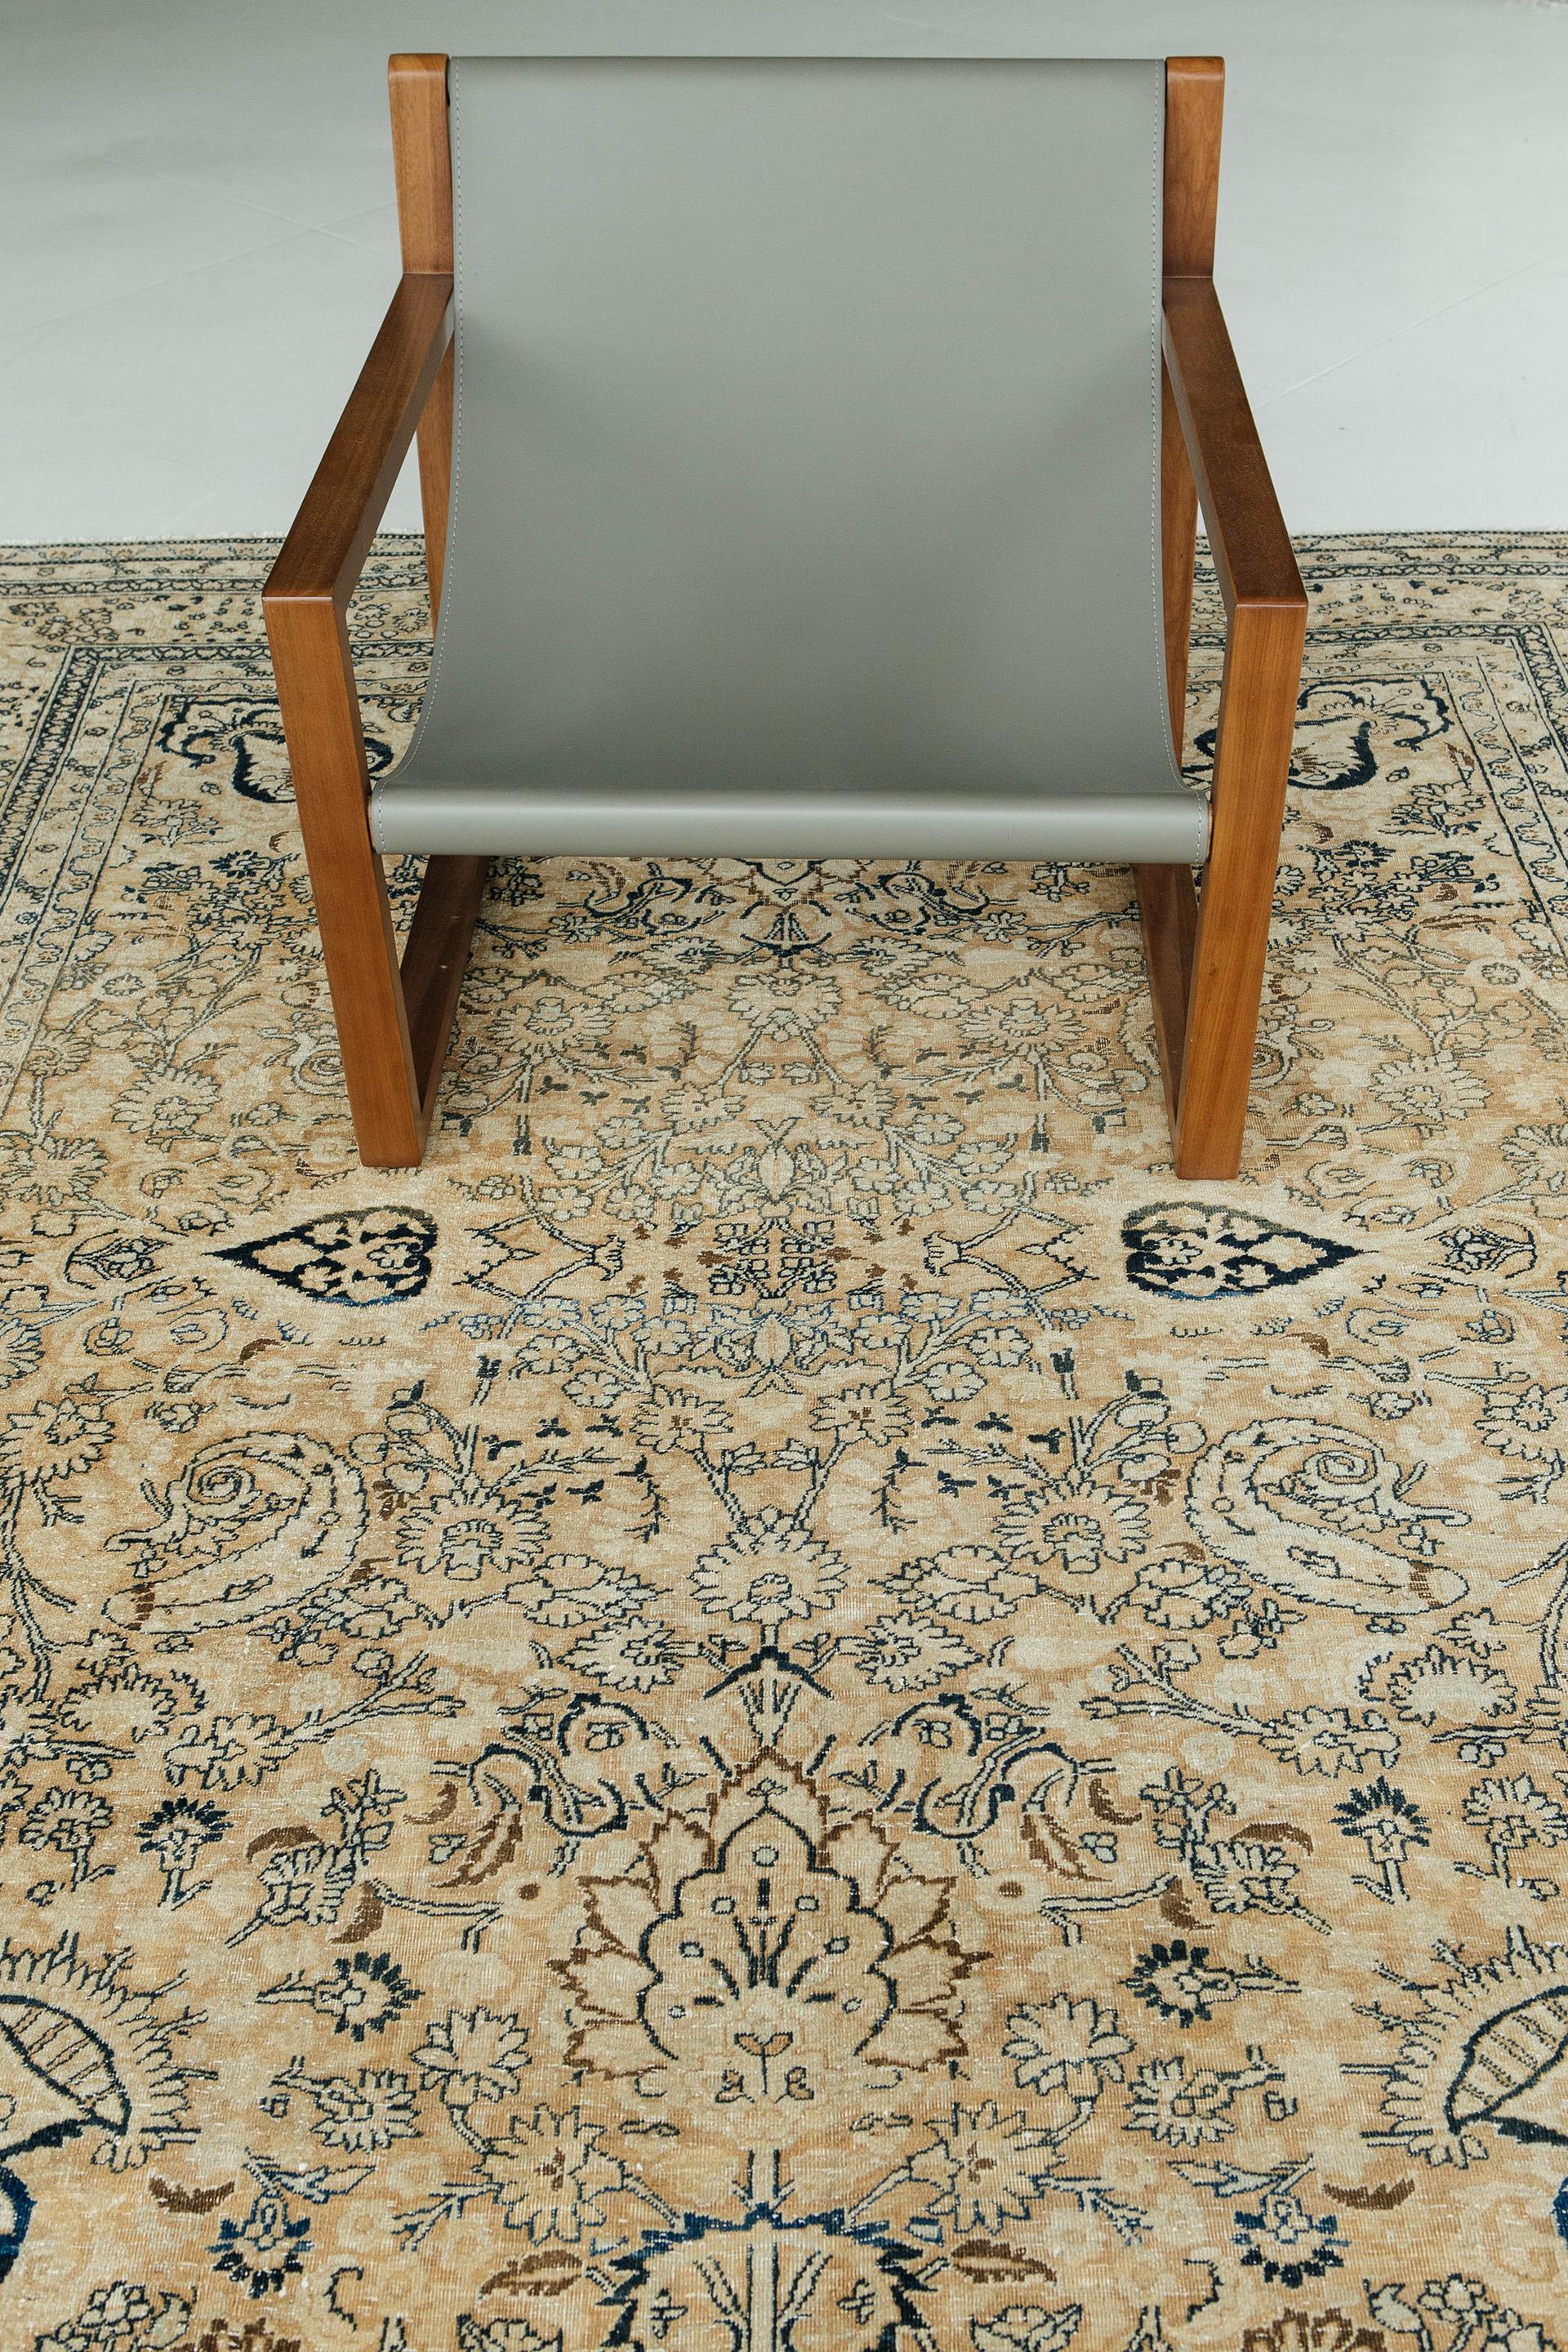 Soft brown ground with ivory and tan motifs delineated in deep indigo and dark brown colors. This rug brims with floral vines, palmettes, spiraling leaves and features vase motifs in each corner. The composition is framed by floral borders and